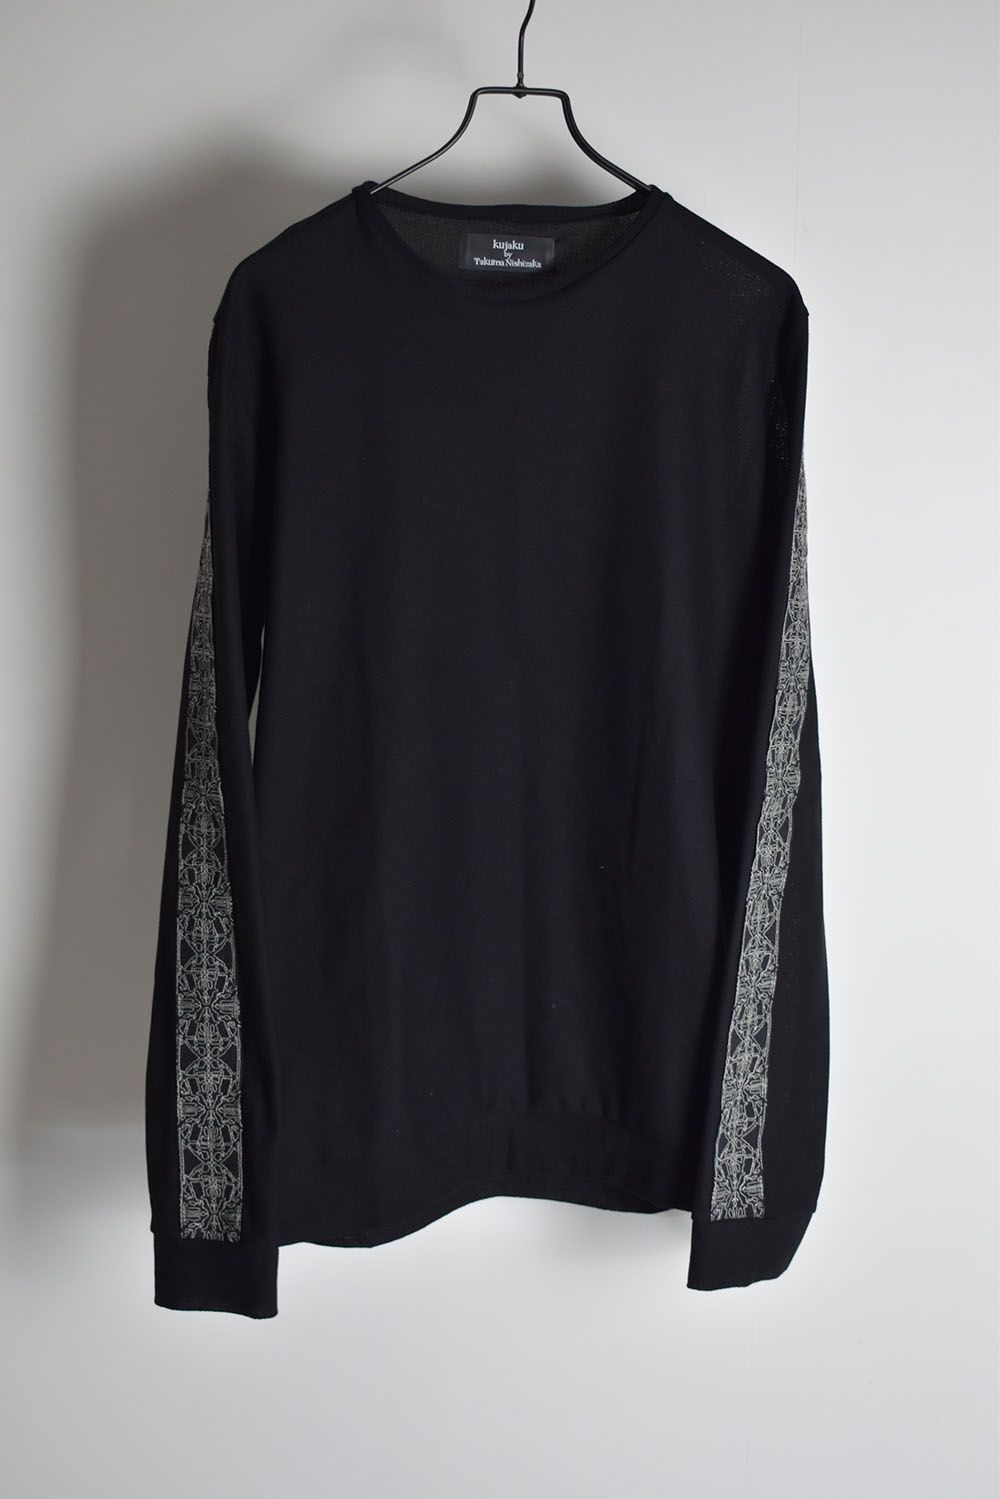 Embroidery Knit Long Sleeve Tee"Black"/刺繍ニットロングスリーブTee"ブラック"